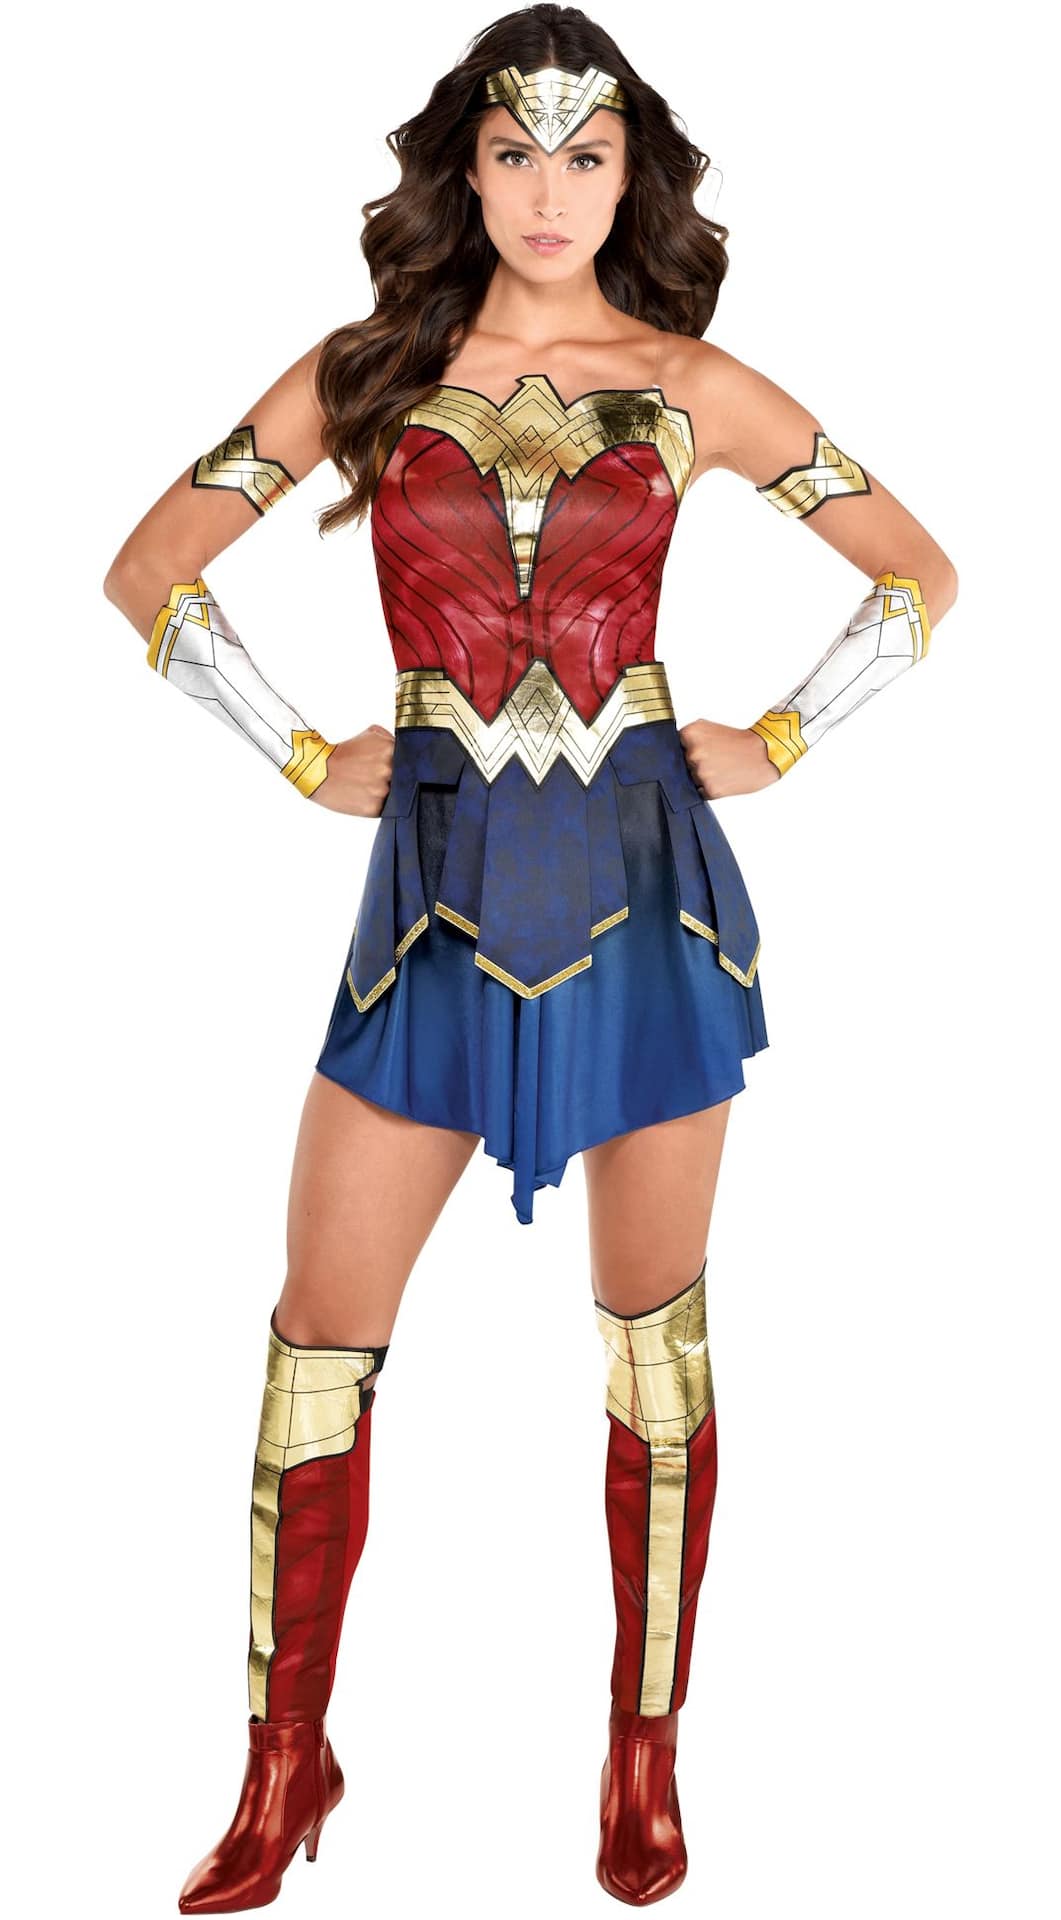 Wonder Woman Red/Blue Dress Costume with Accessories for Halloween ...